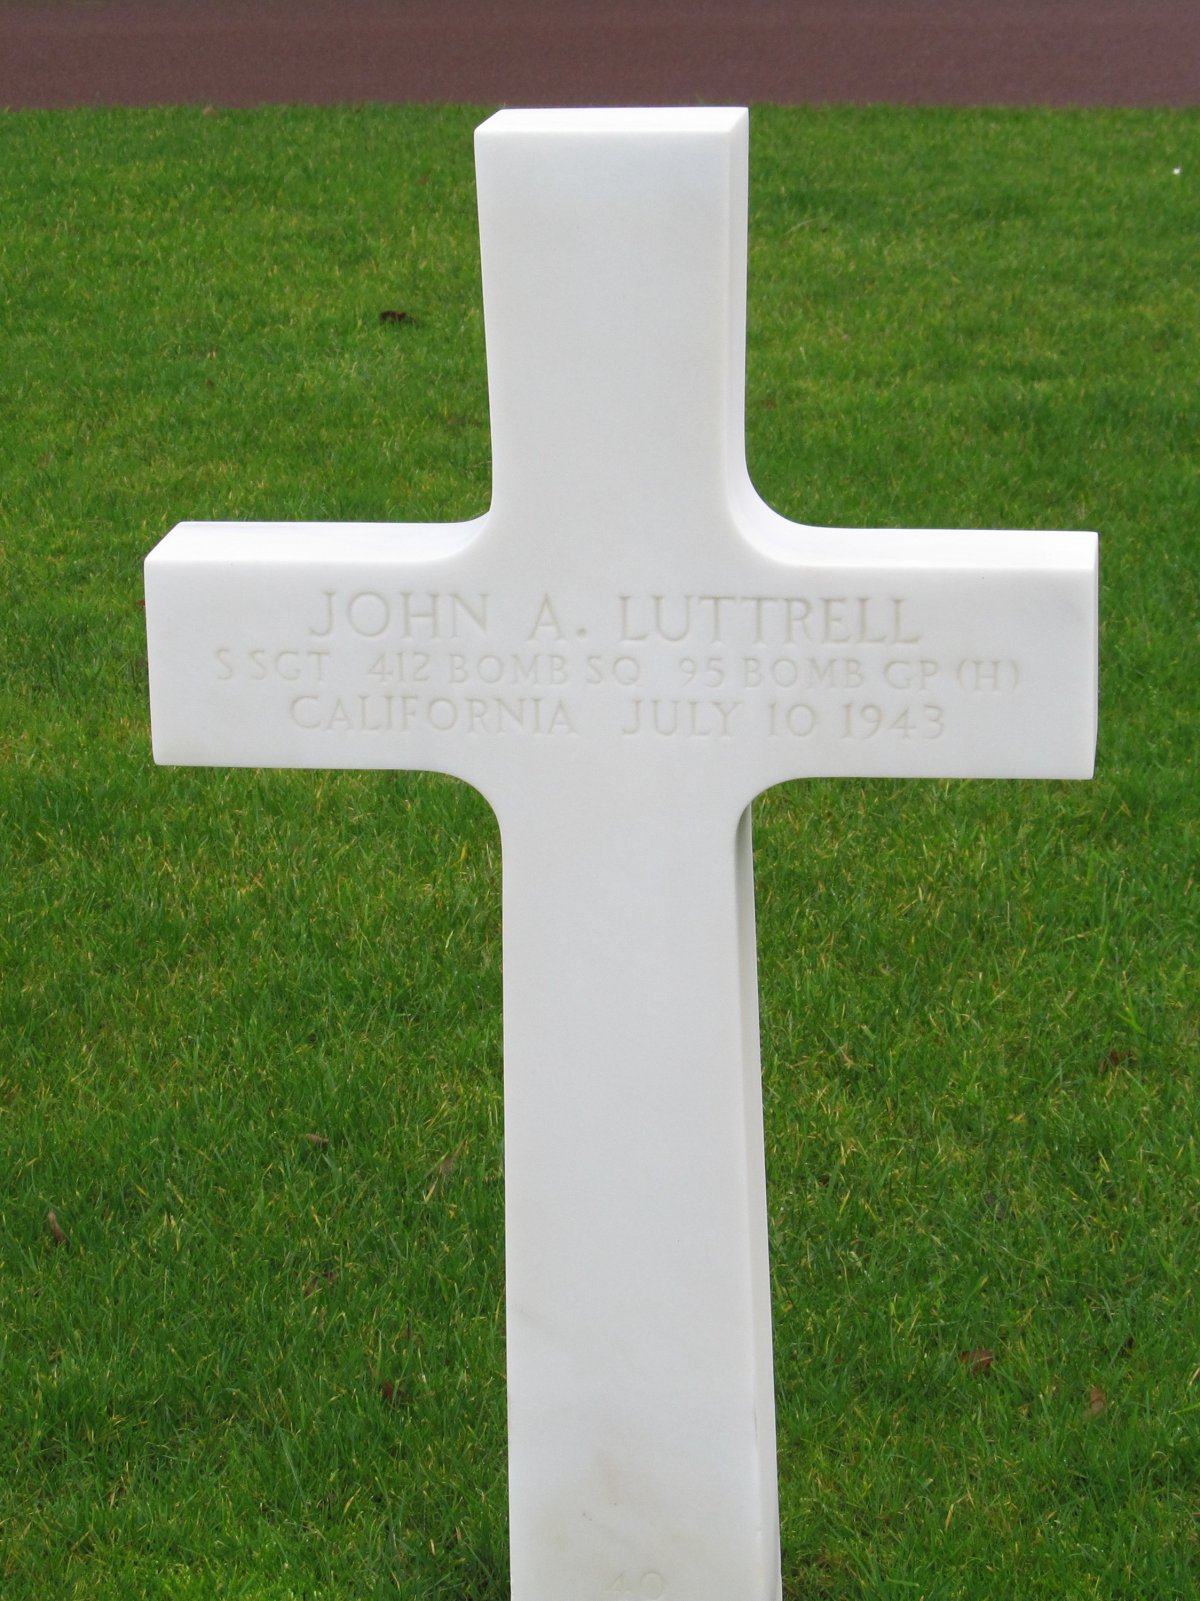 LUTTRELL John A tombe